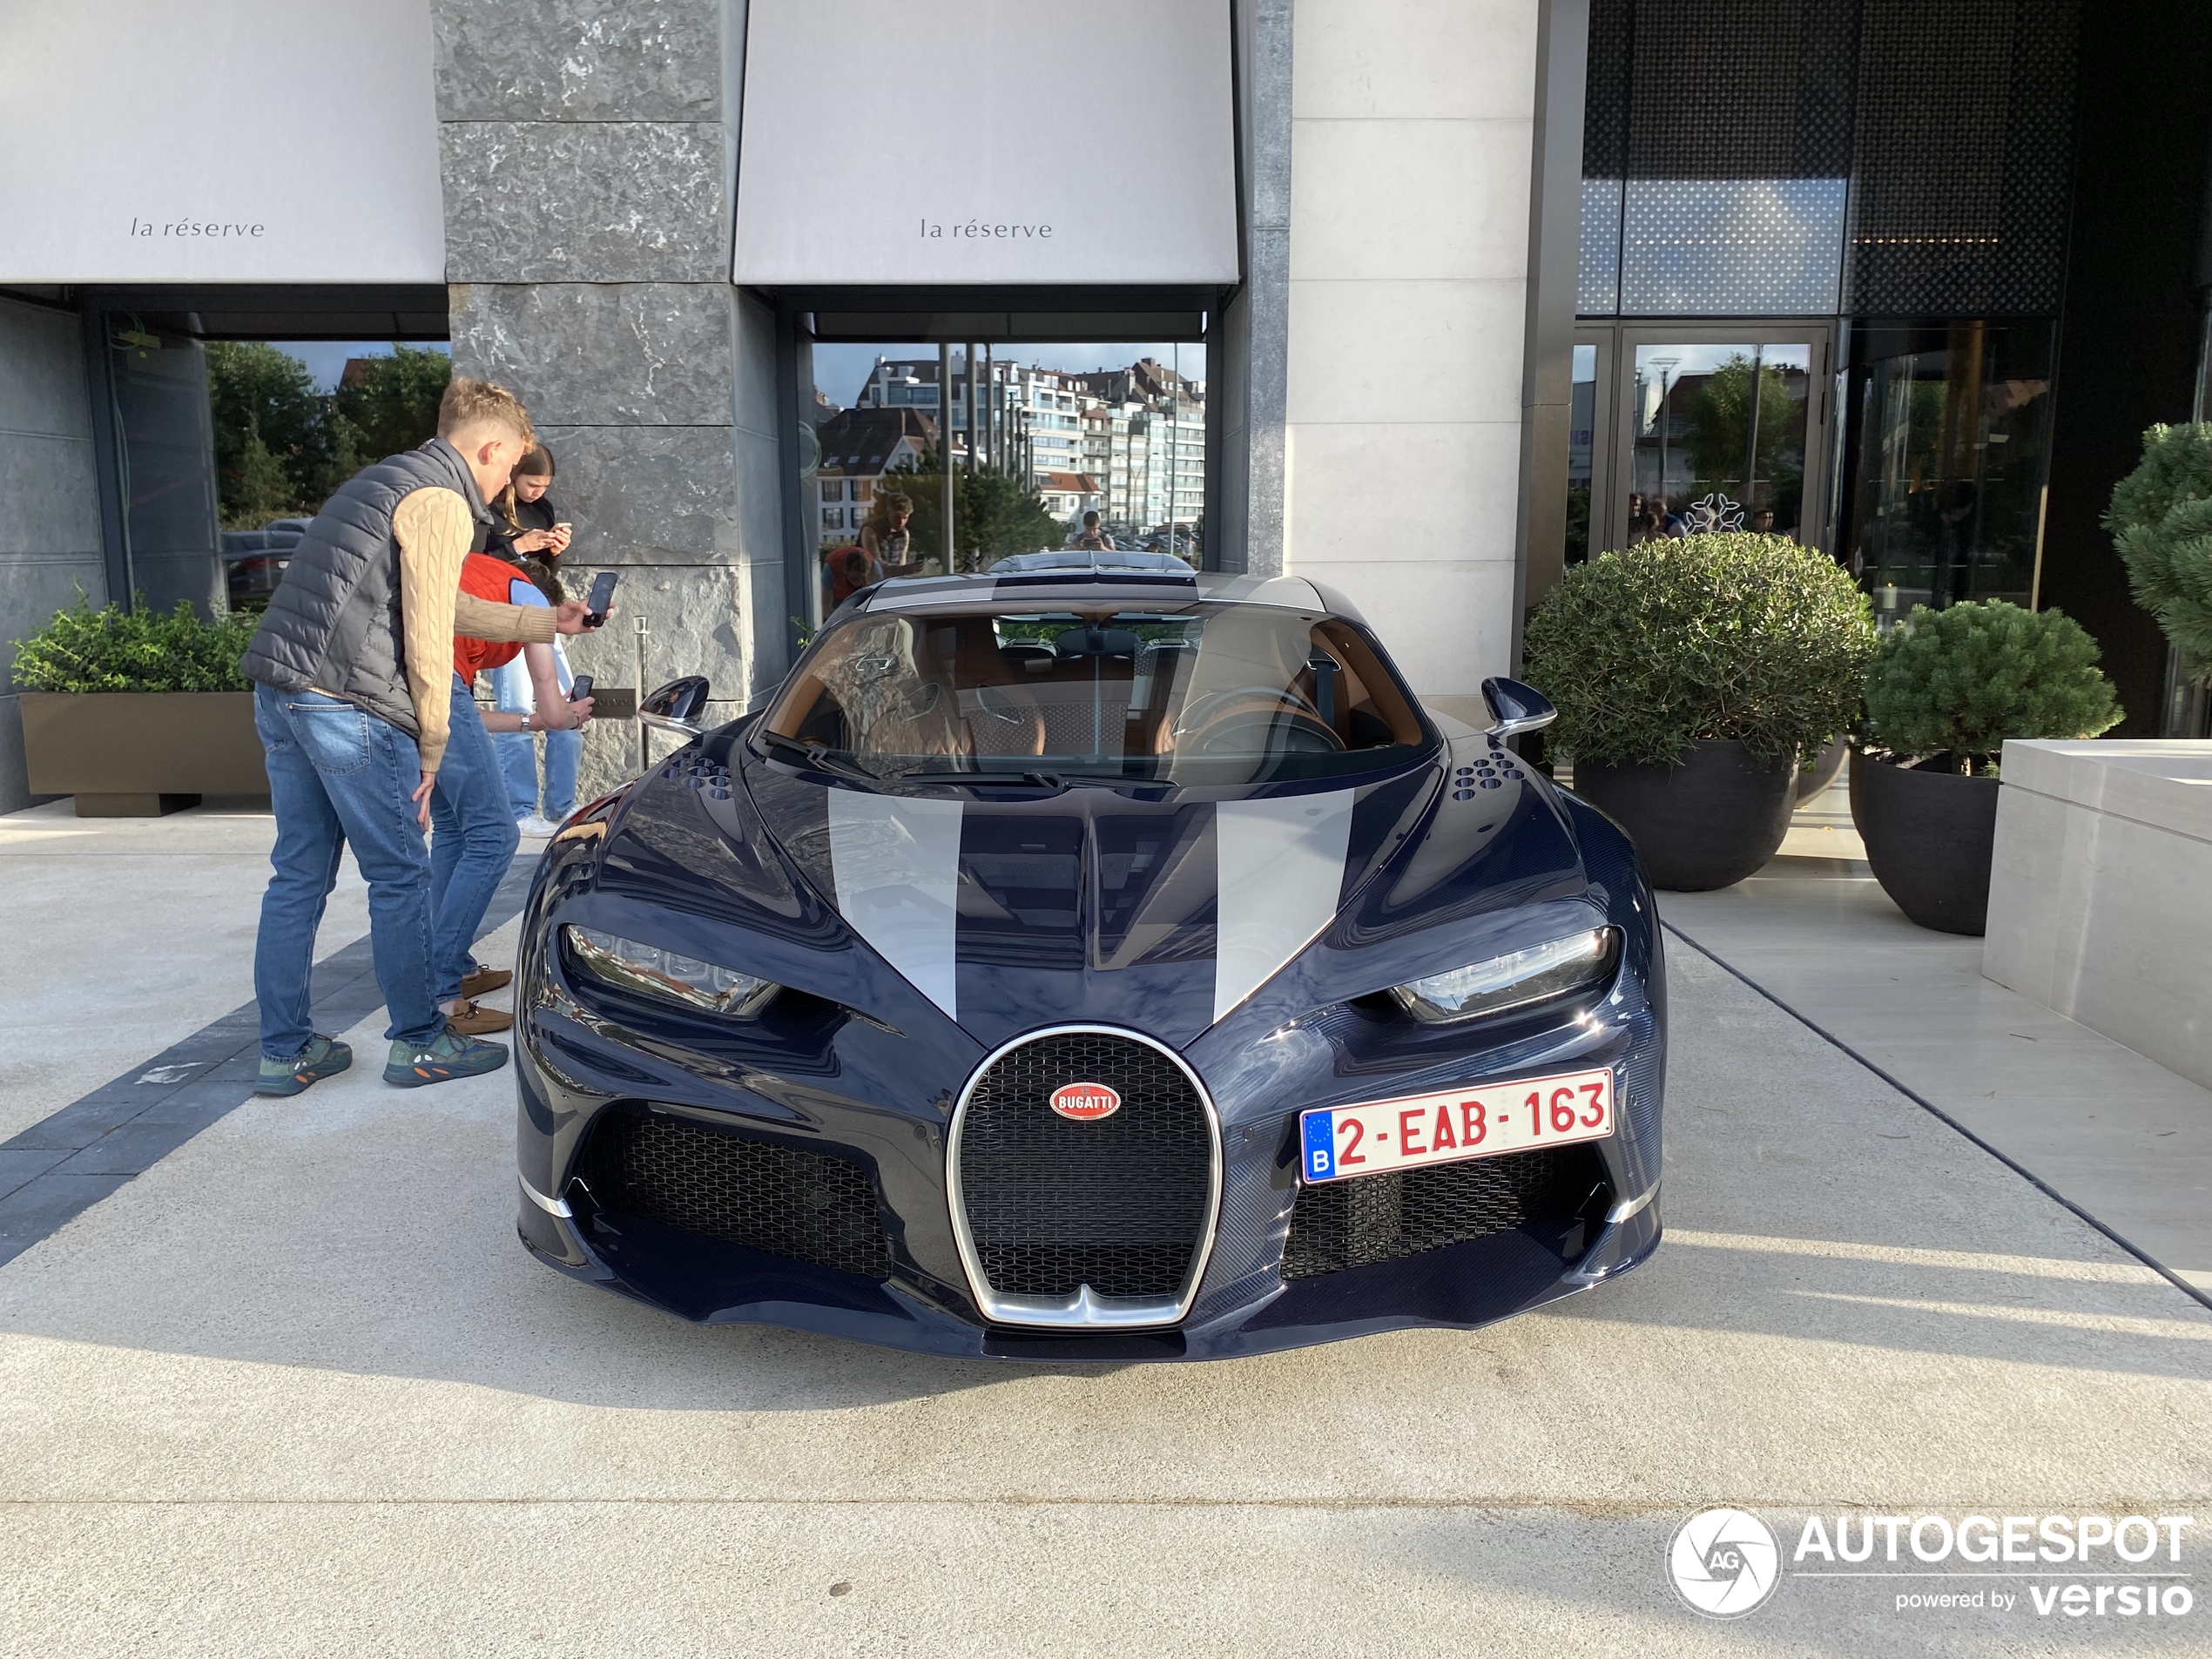 A new Chiron Super Sport shows up in Knokke-Heist